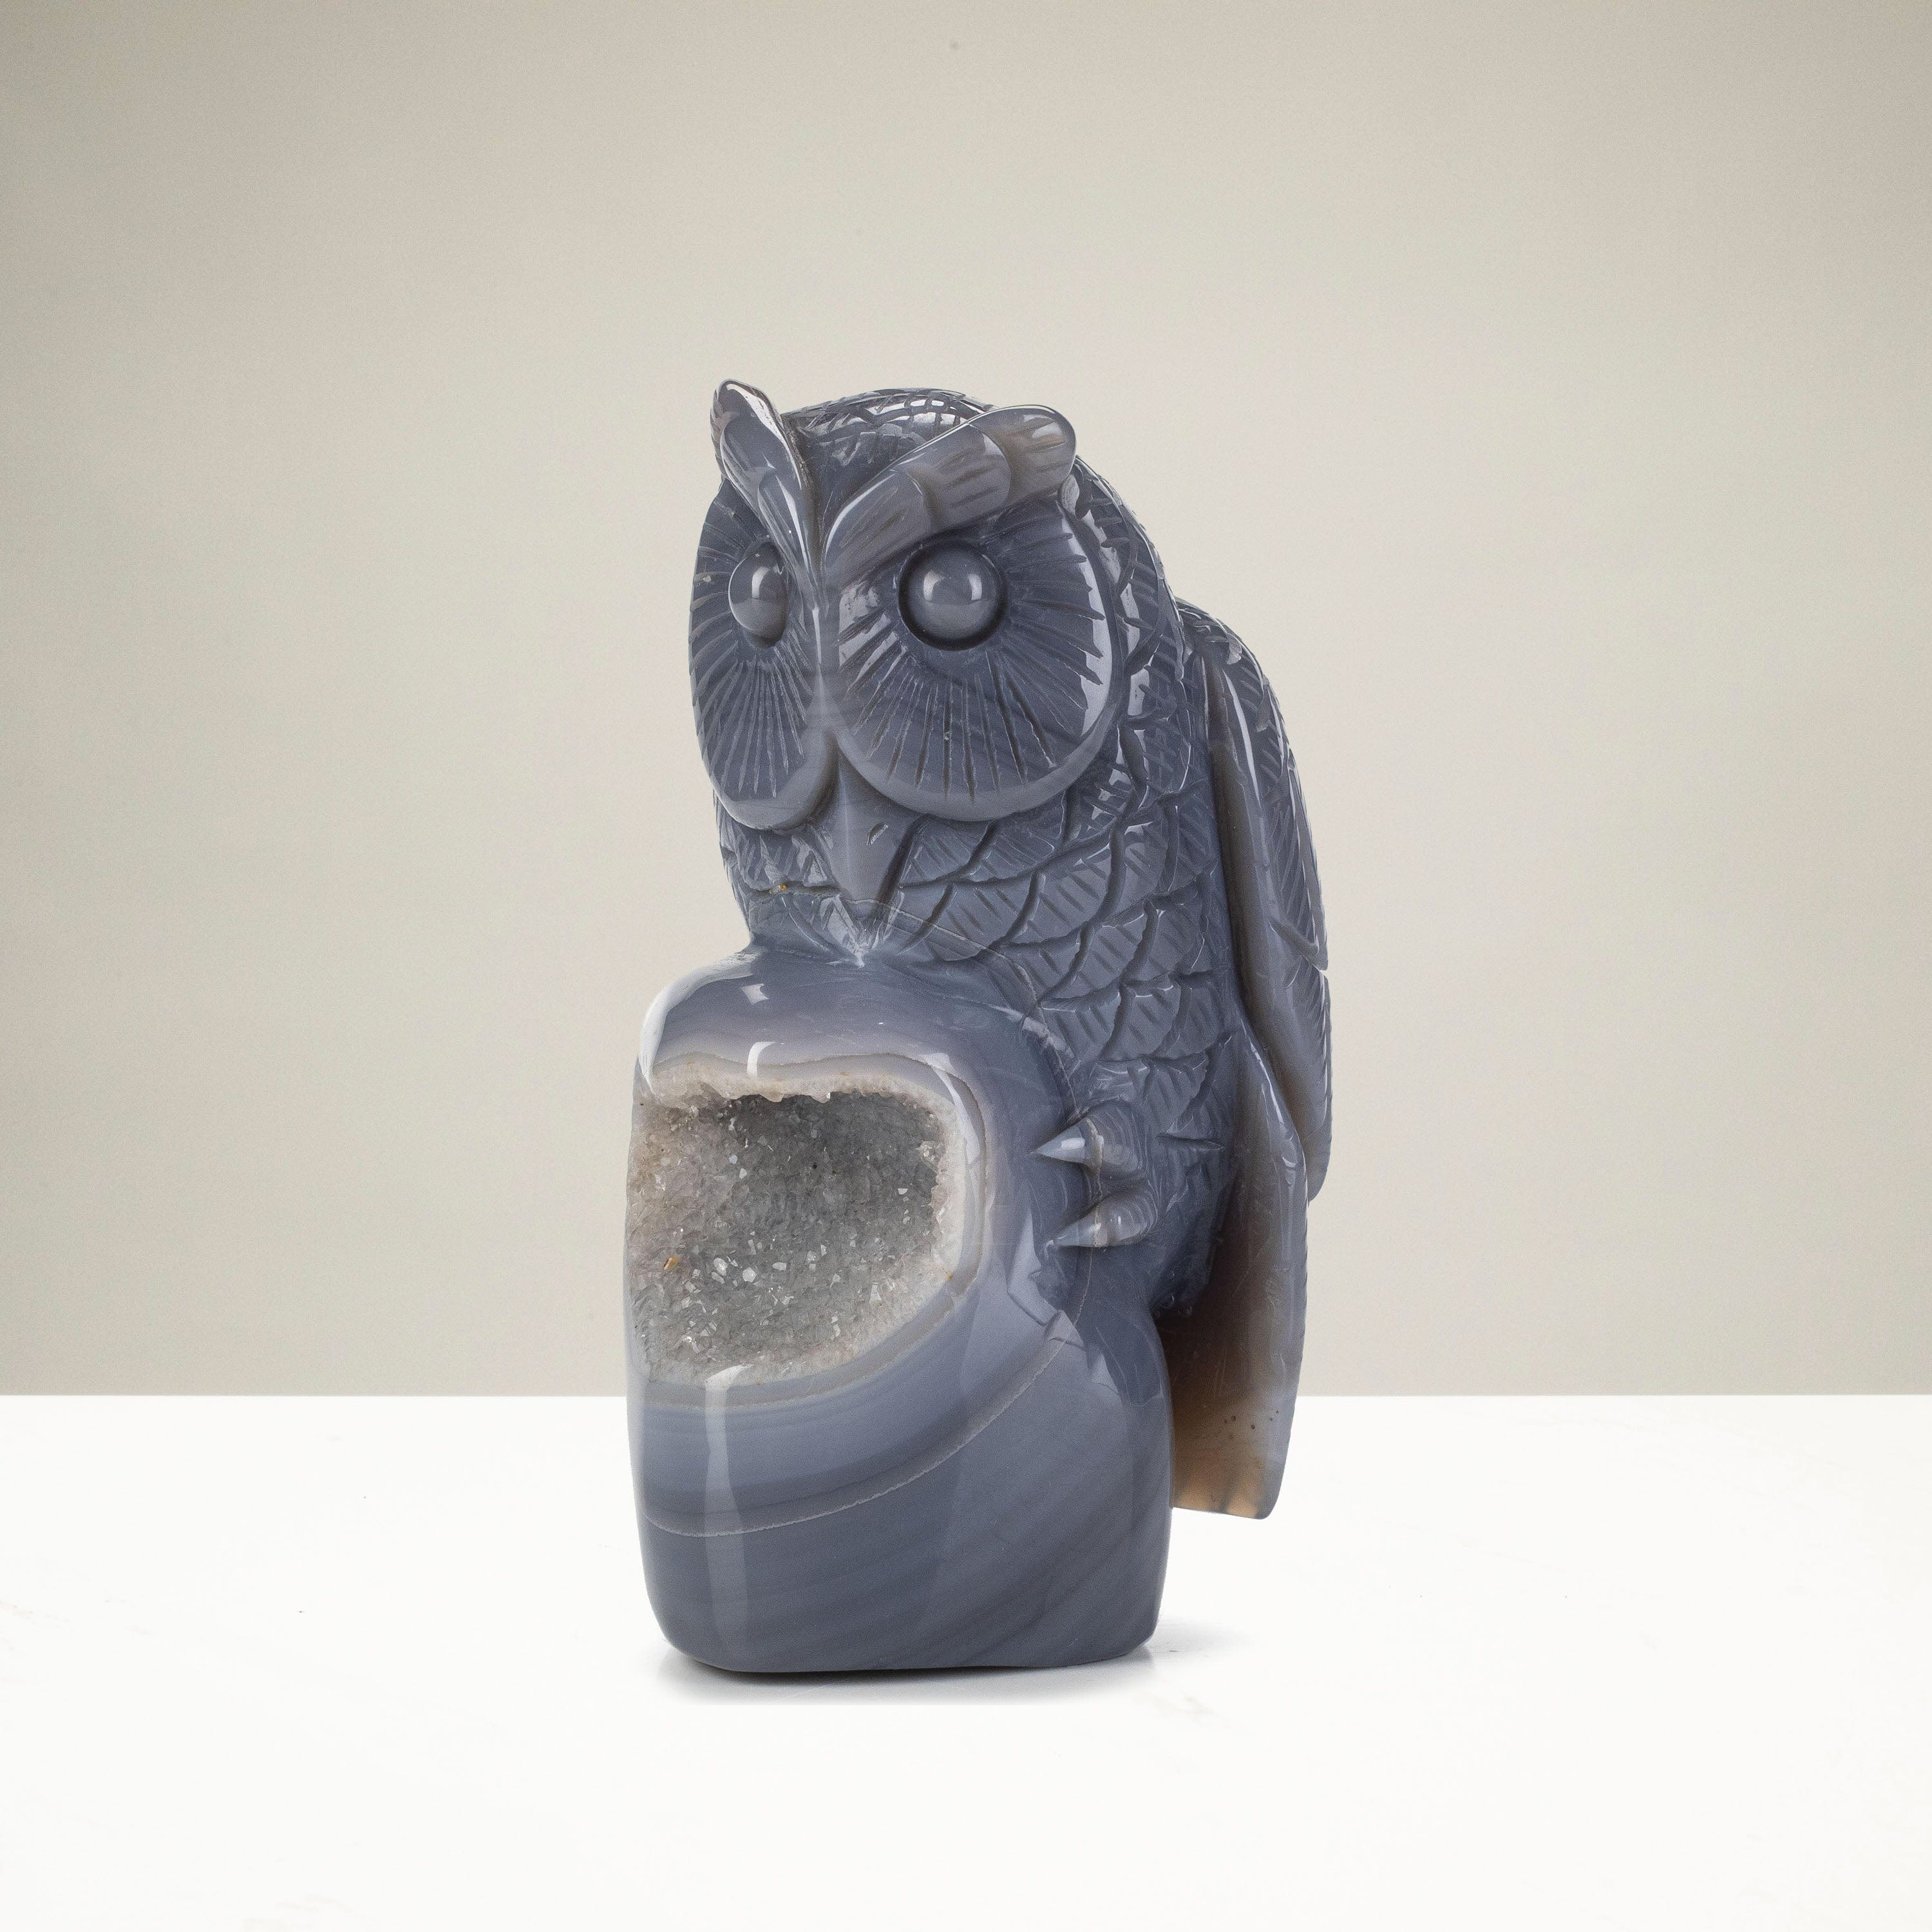 Kalifano Gemstone Carvings Natural Brazilian Blue Lace Agate Owl Animal Carving - 5.2 in CV298.002